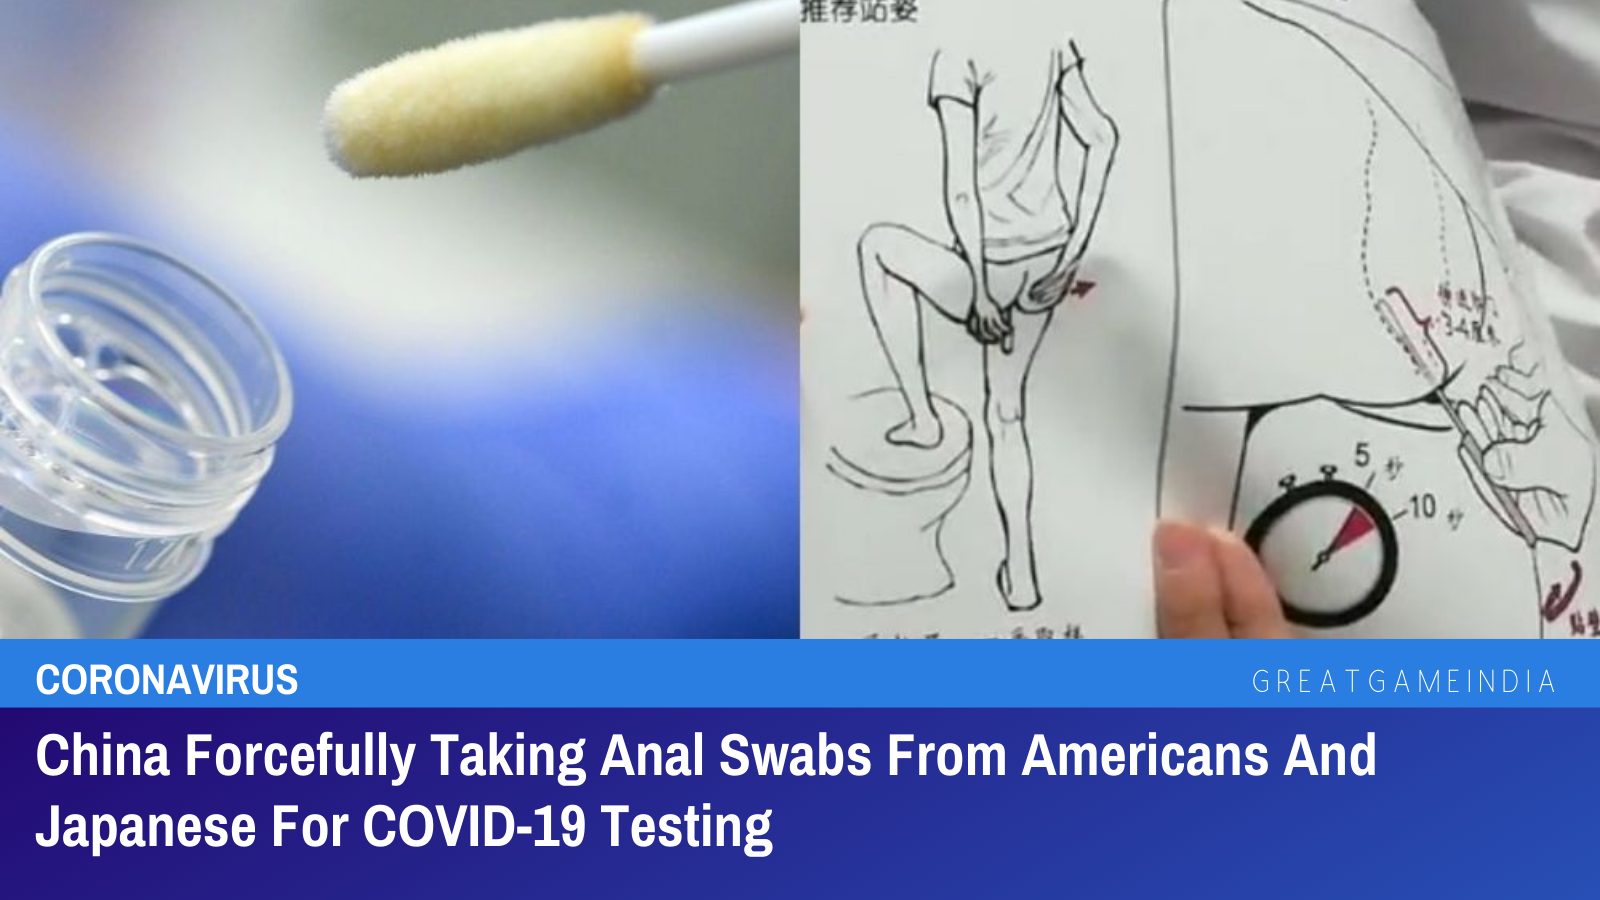 China Forcefully Taking Anal Swabs From Americans And Japanese For COVID-19 Testing